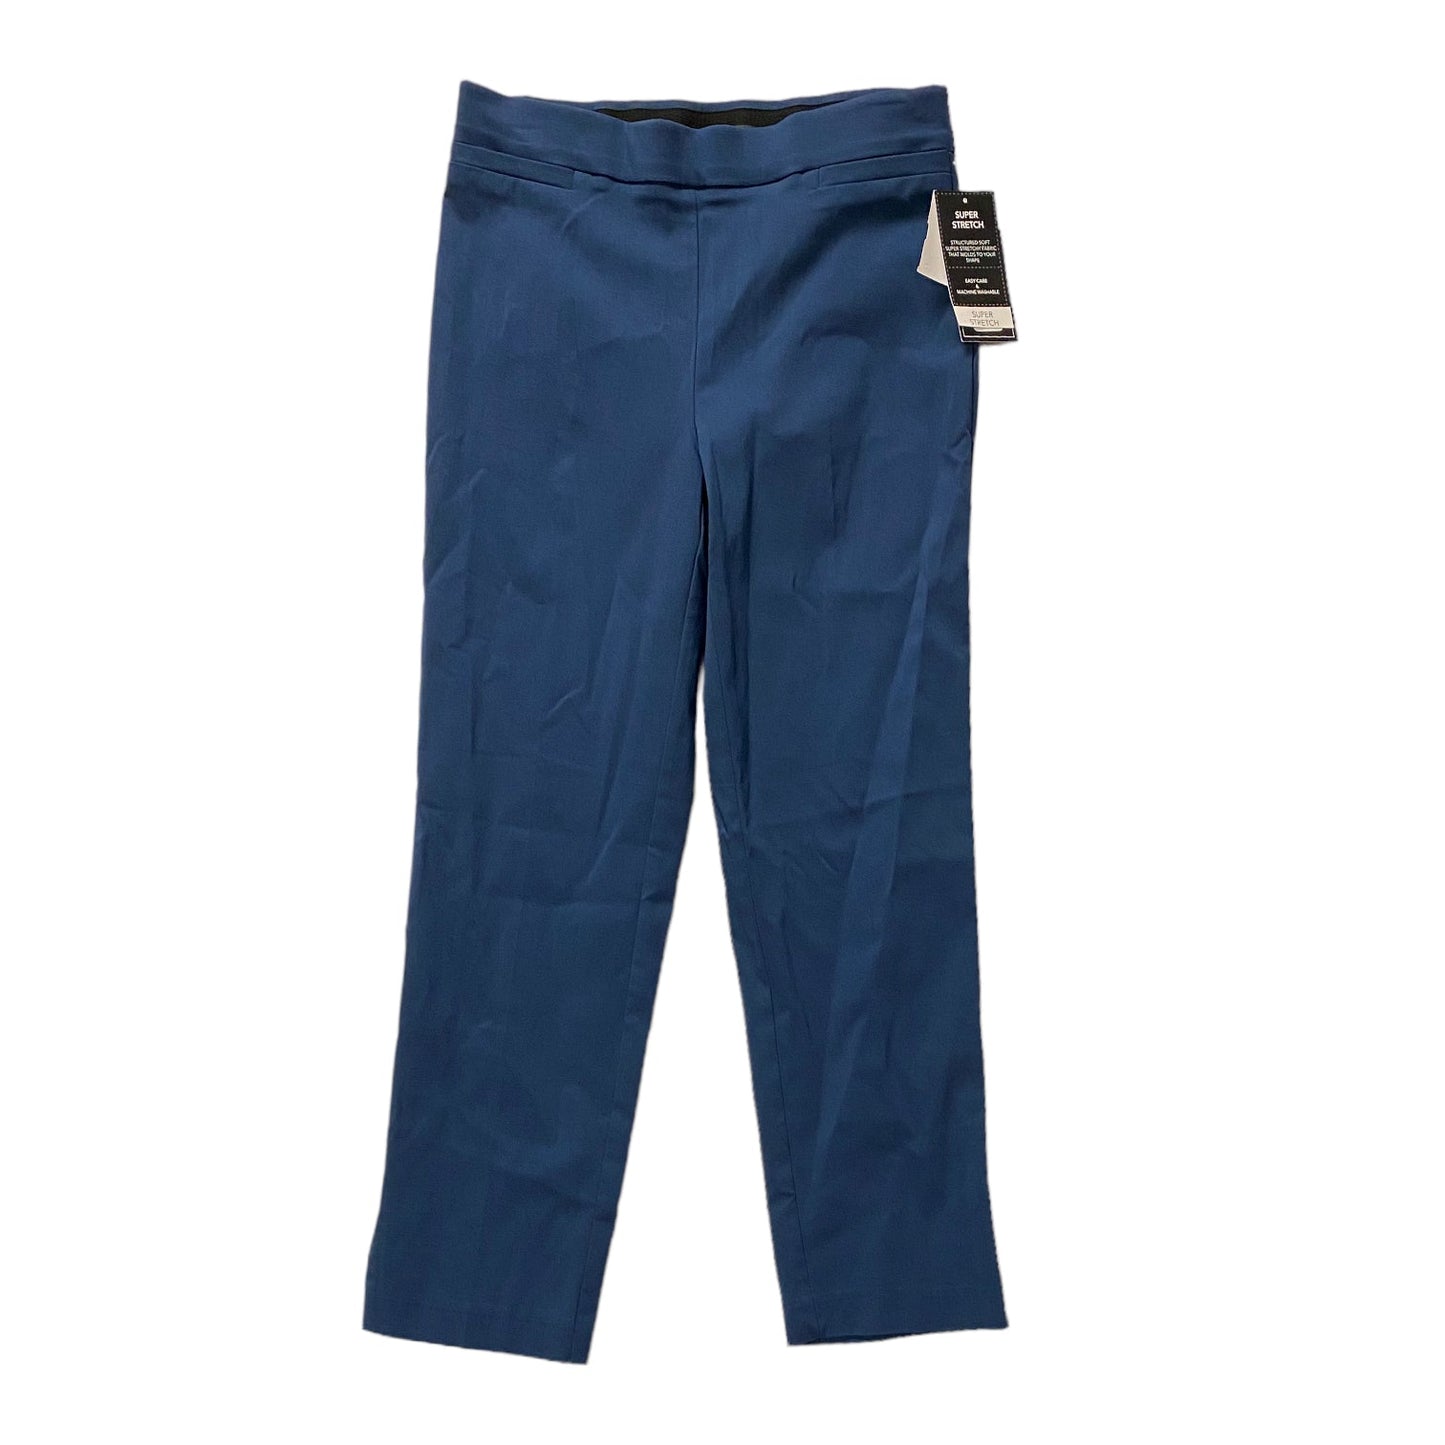 Navy Pants Other Counterparts, Size S